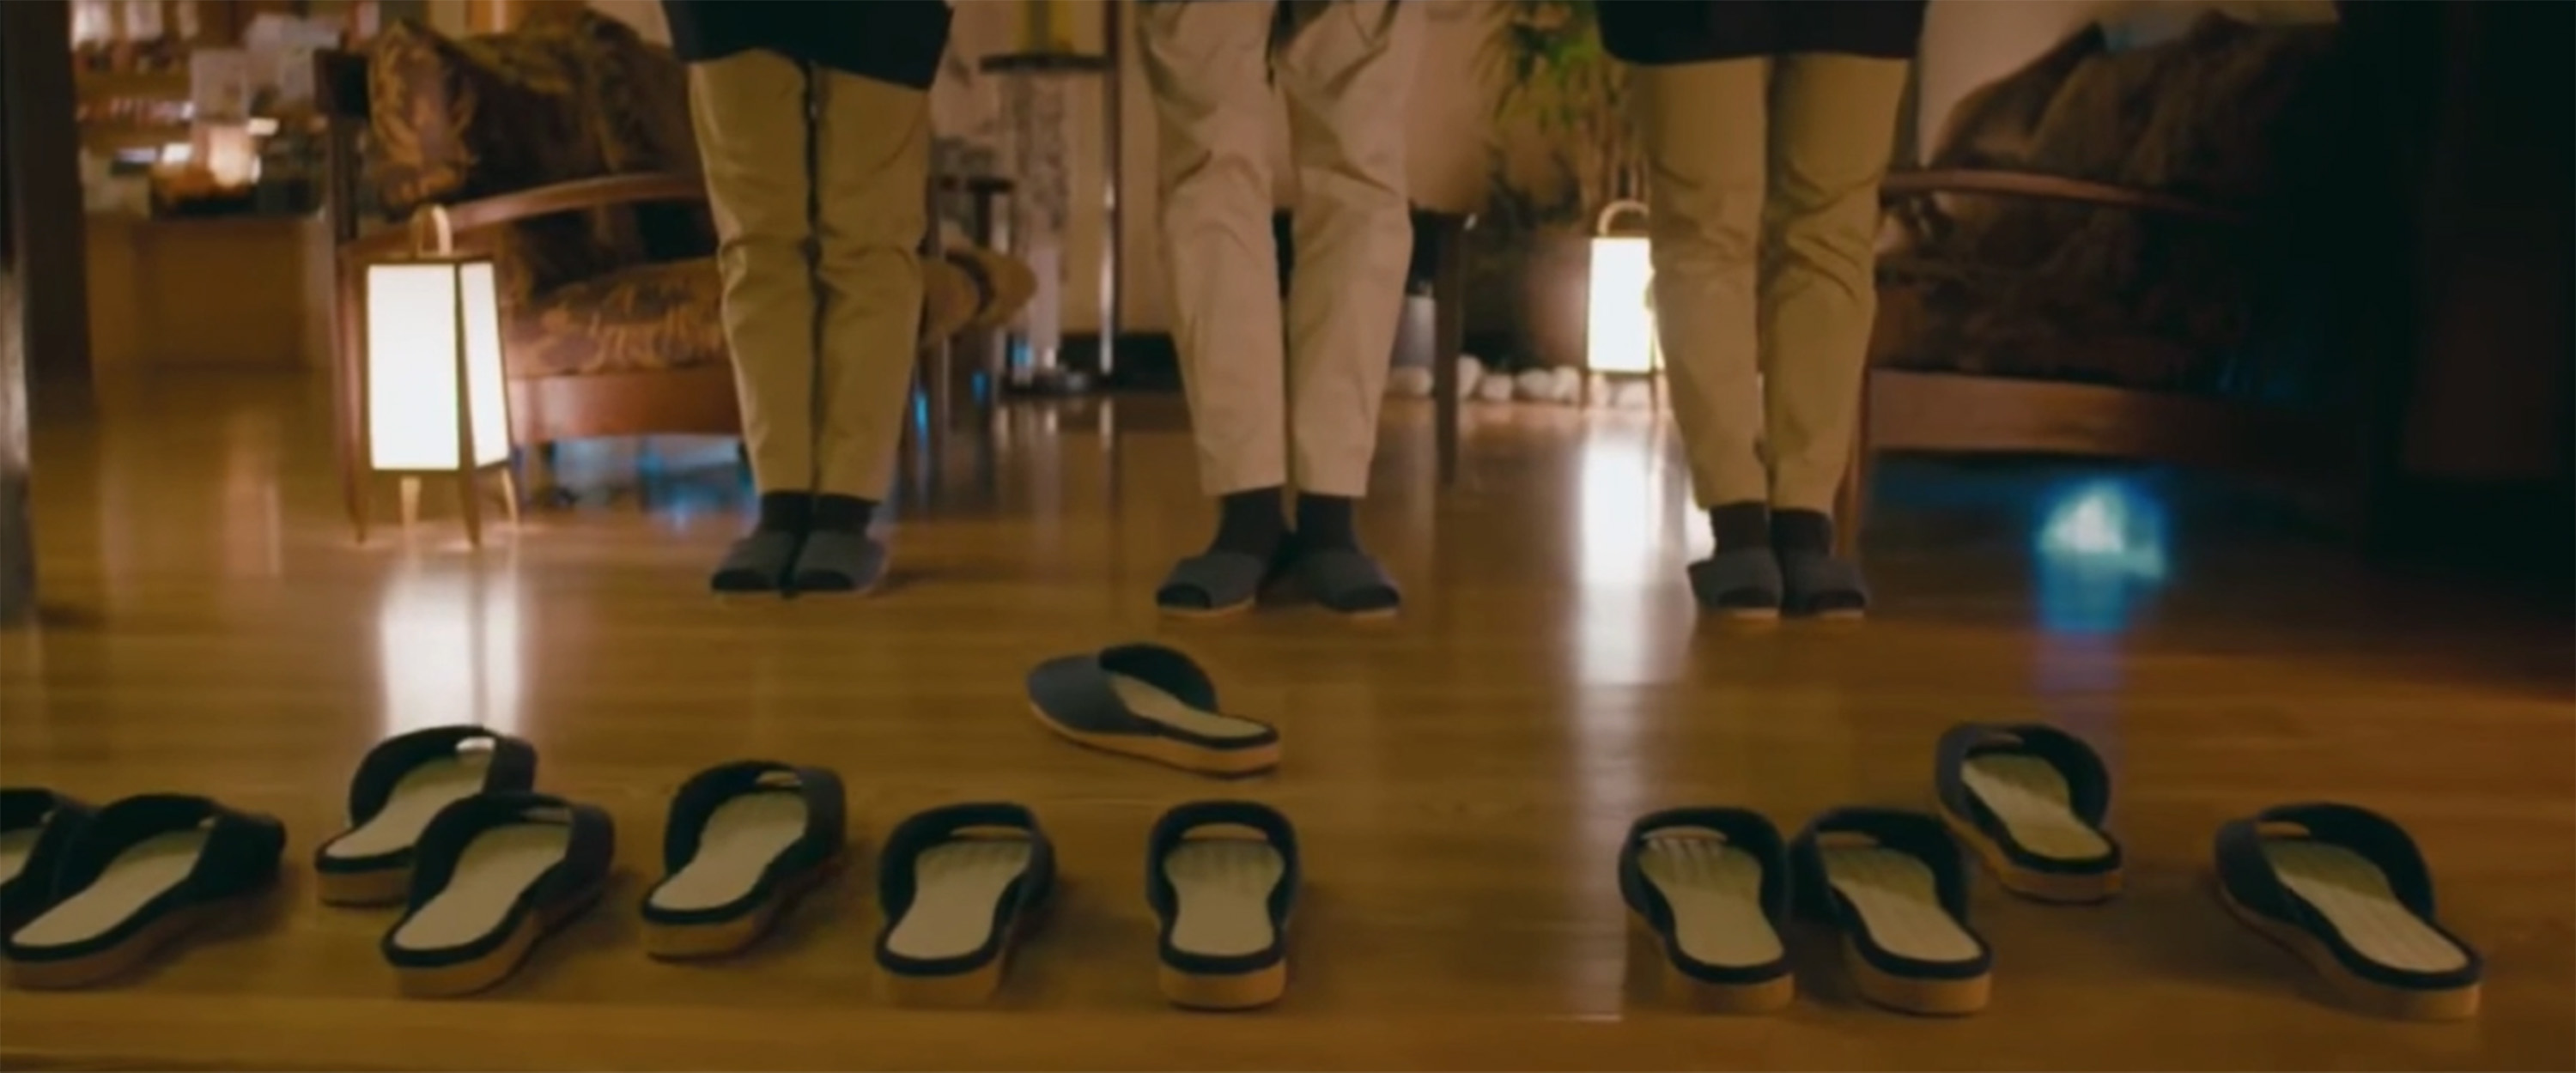 Nissan self-parking slippers